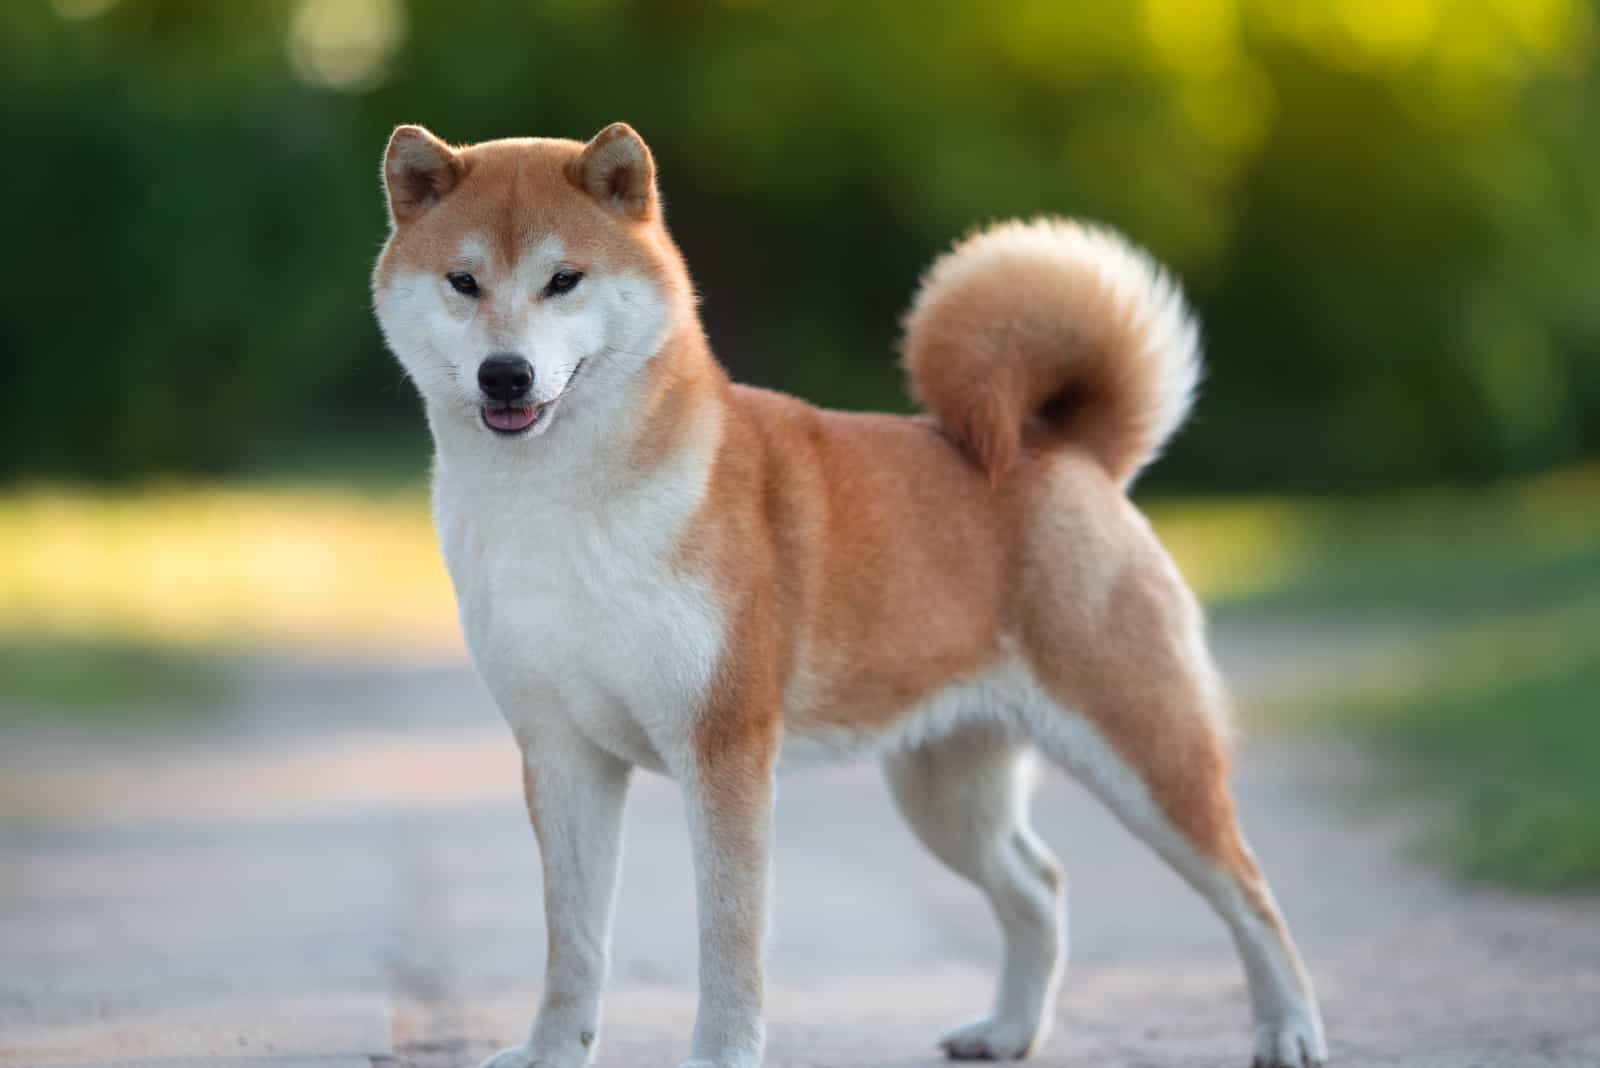 Shiba Inu stands and looks in front of him